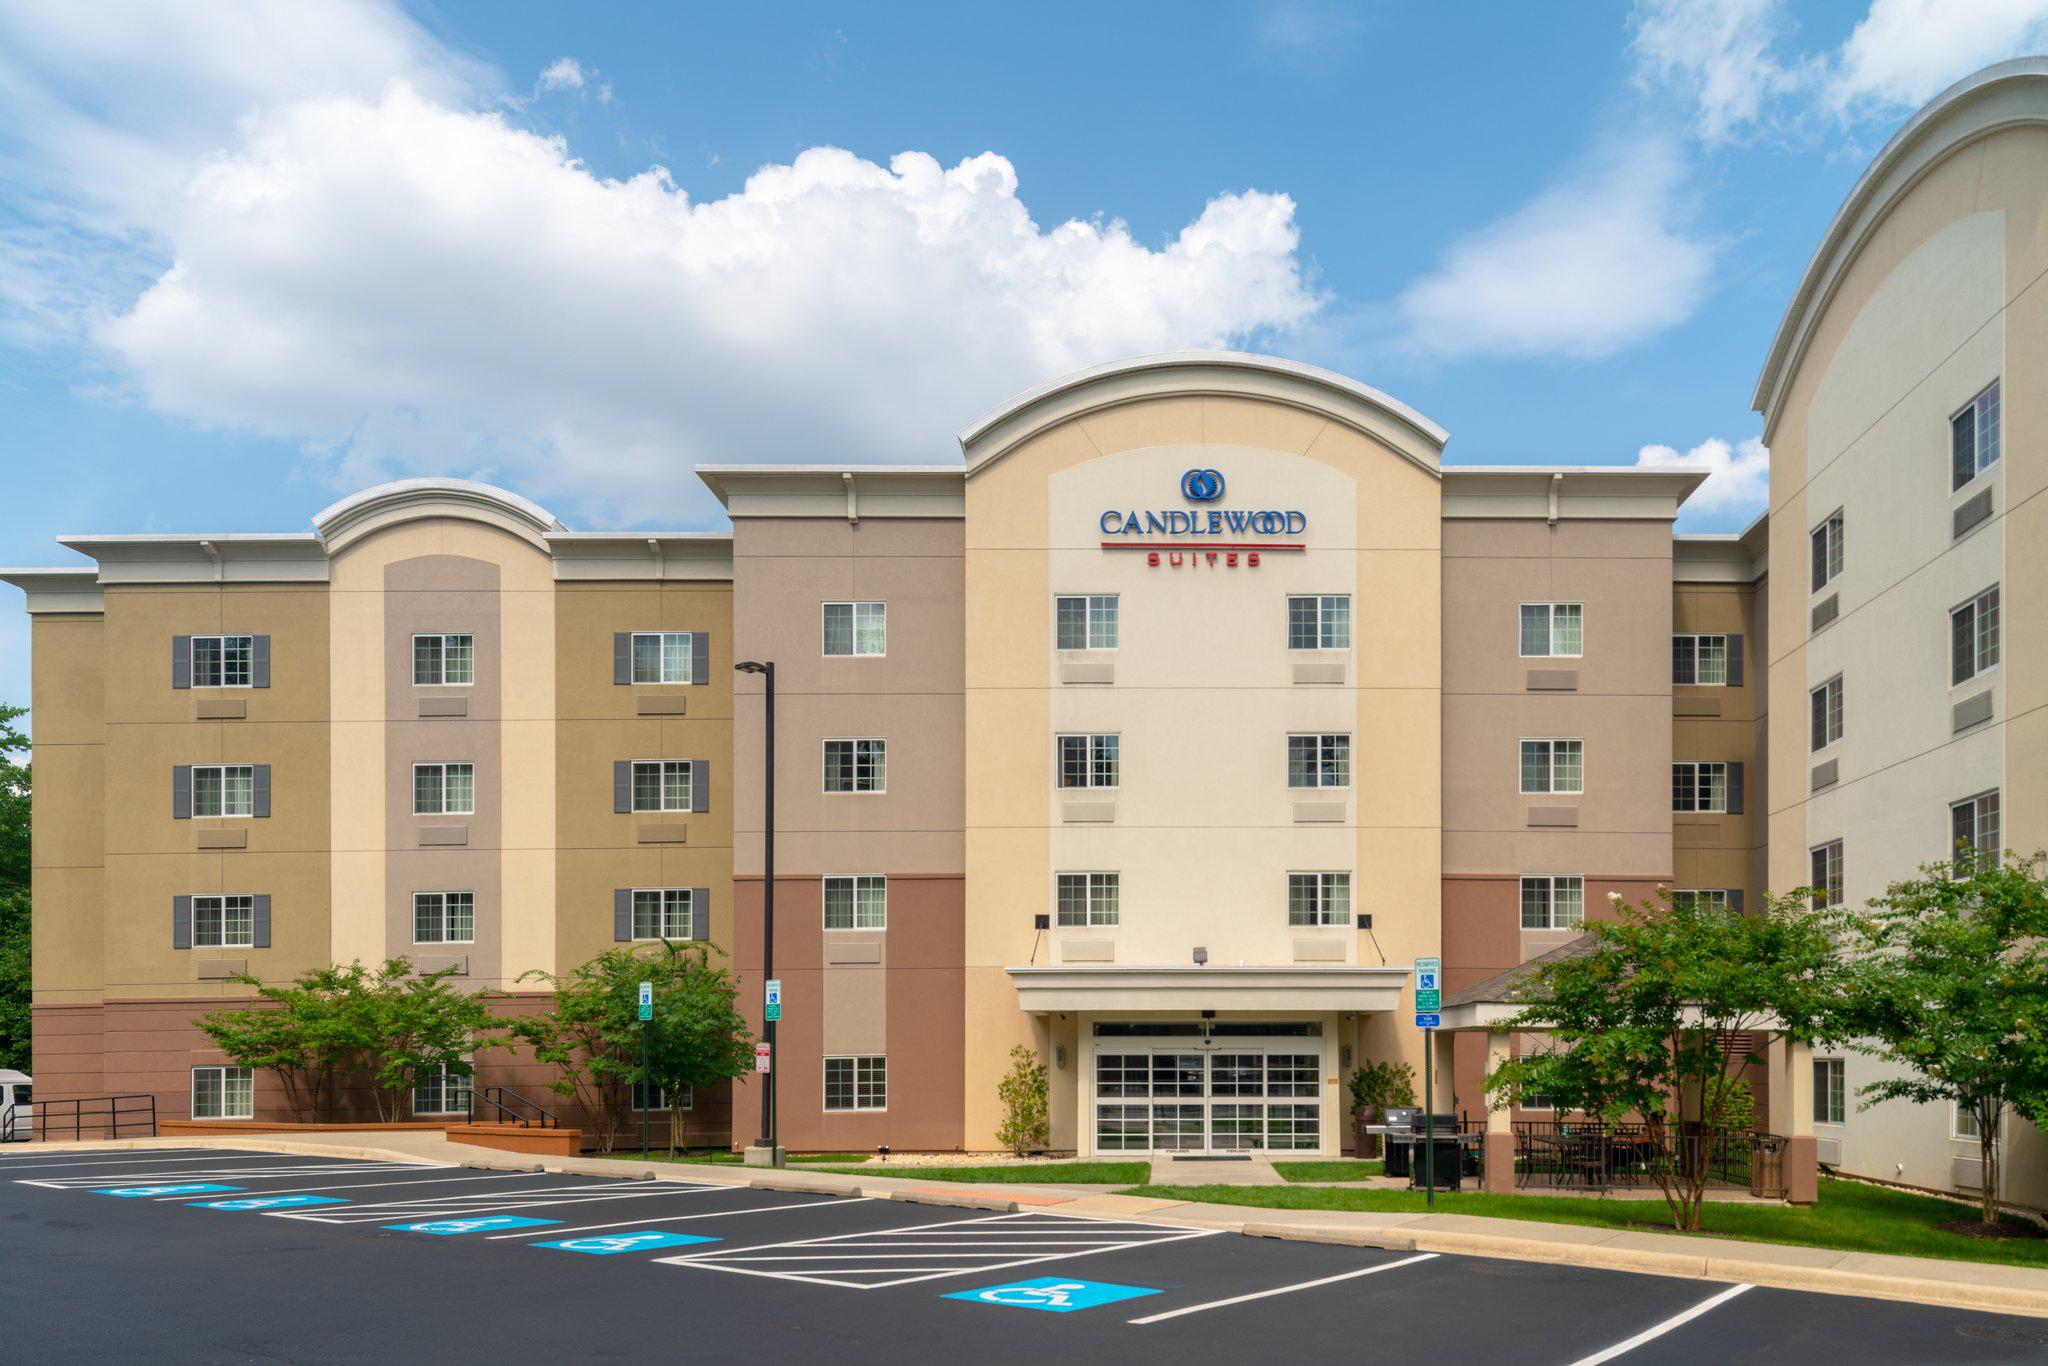 Candlewood Suites Arundel Mills / Bwi Airport Photo